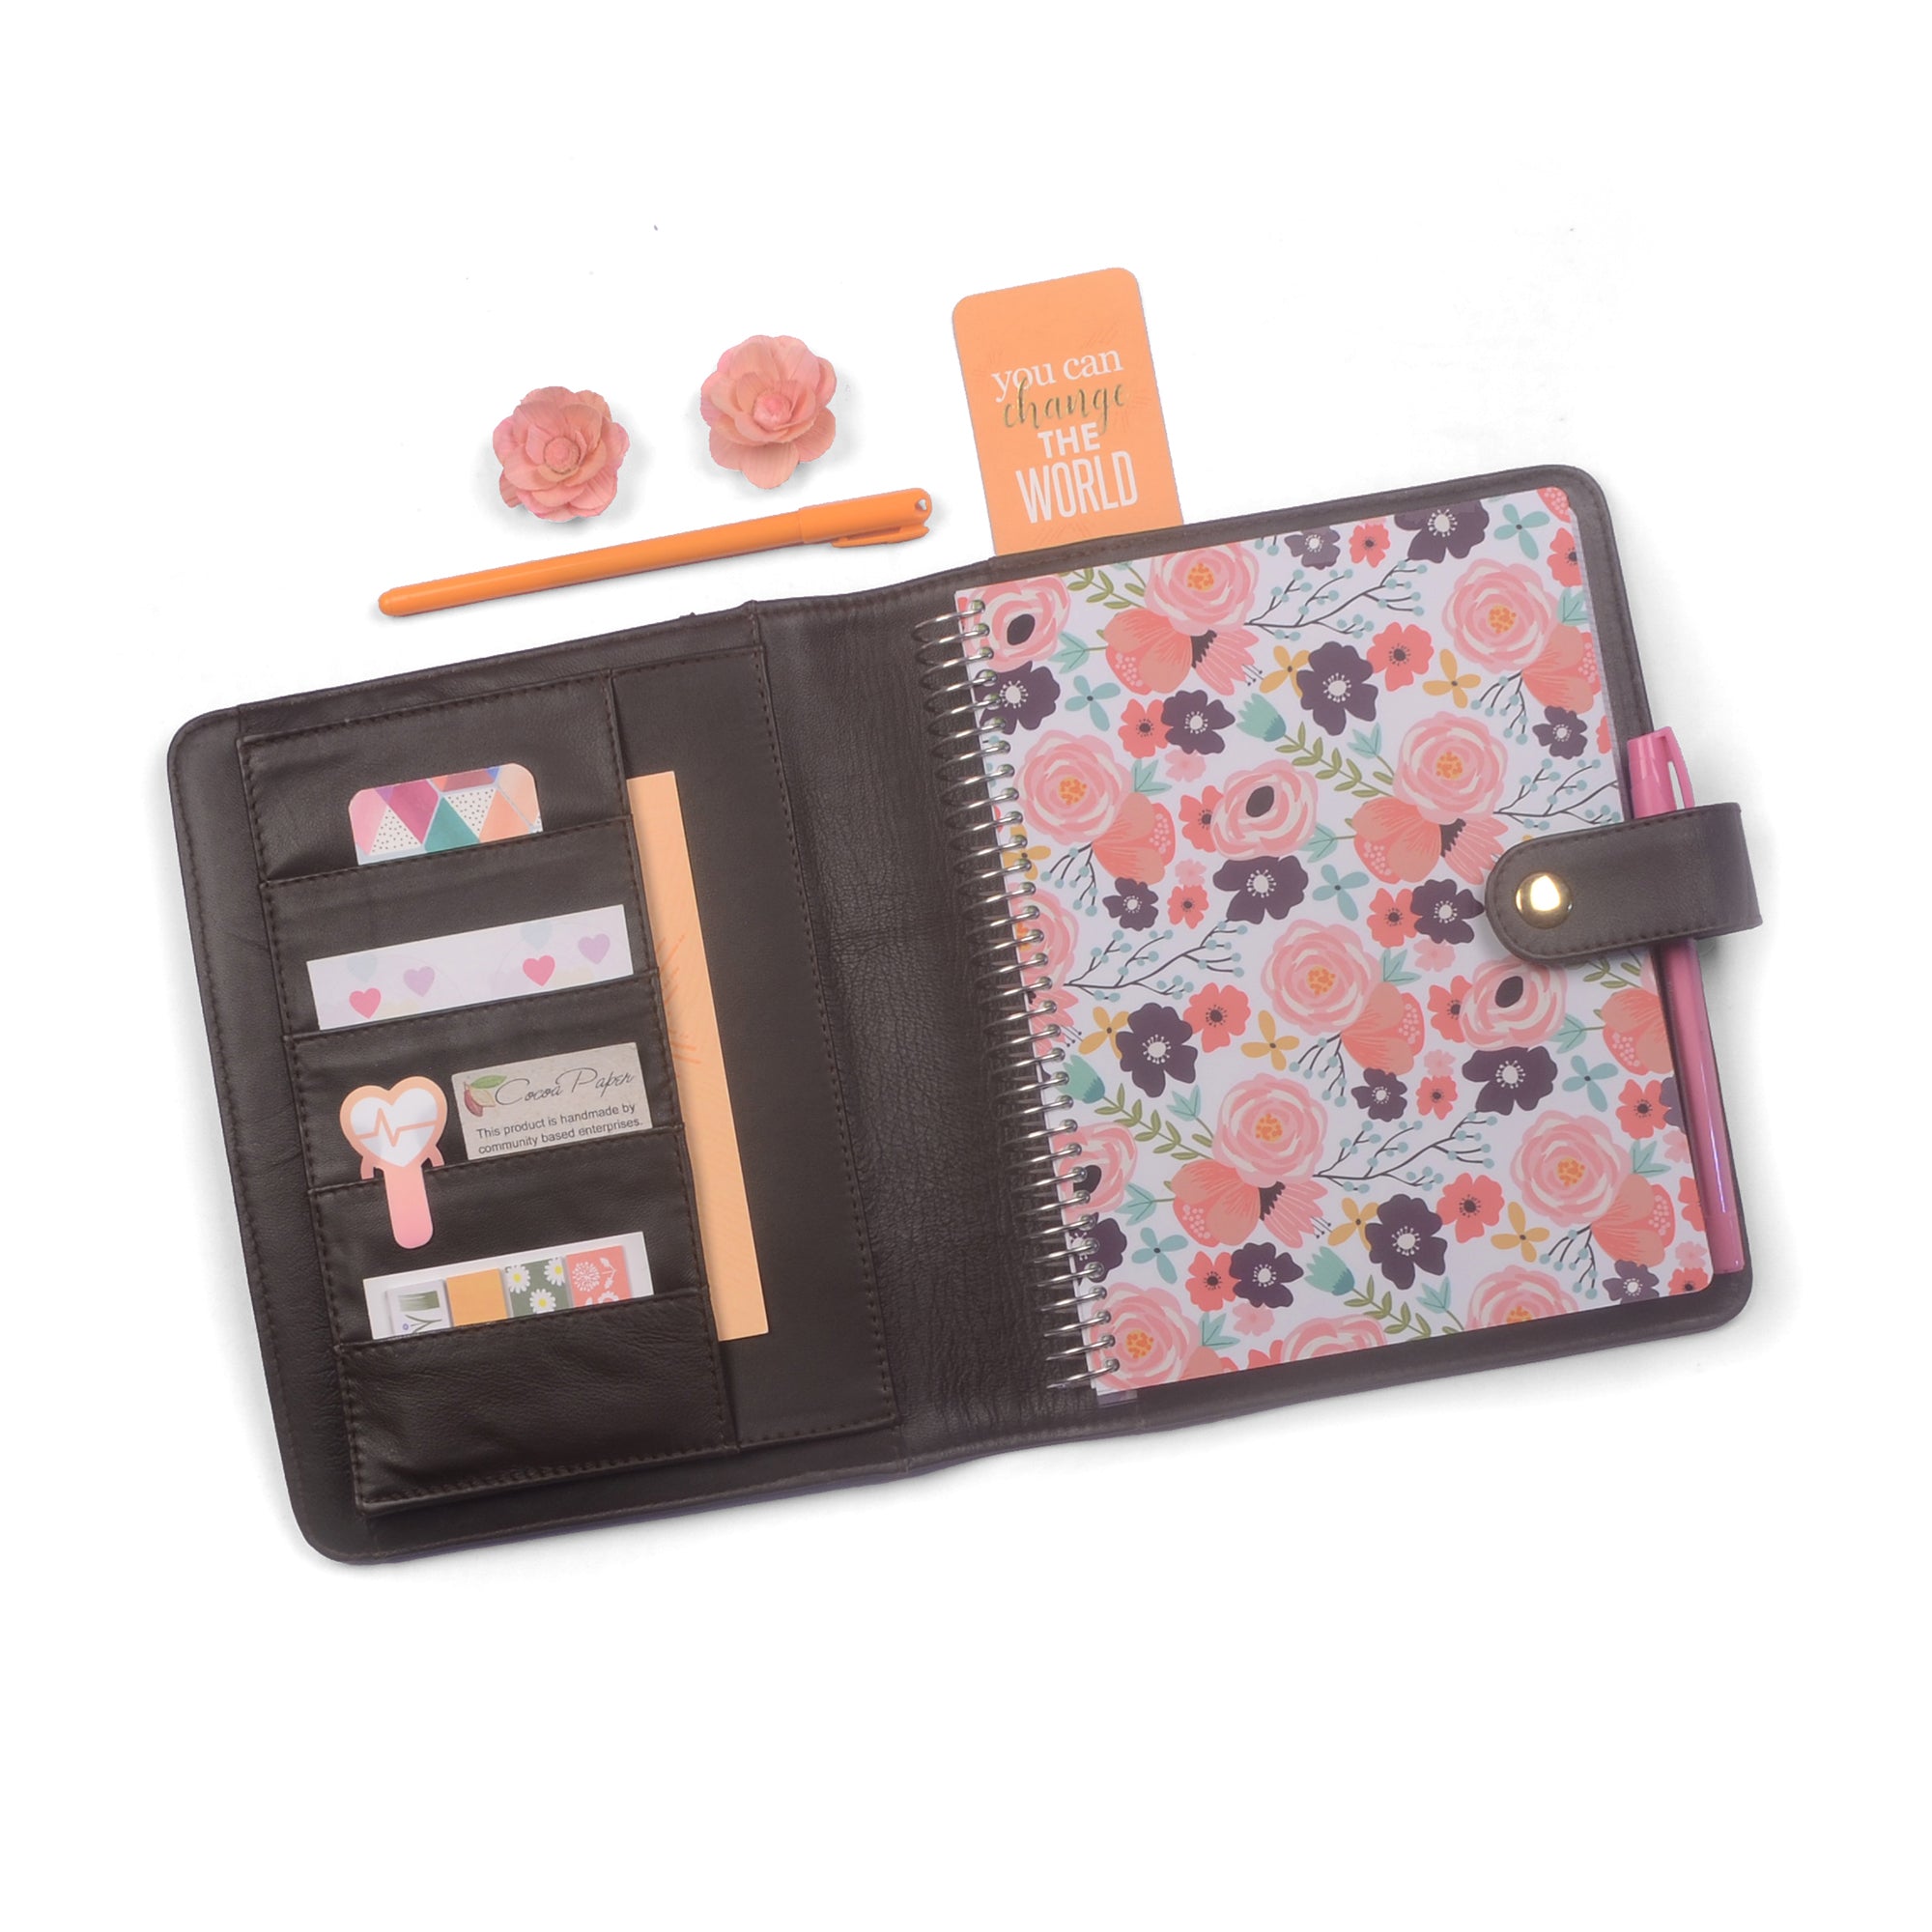 BELLA Zippered A5 / Half Size Planner Cover for Coil Bound 